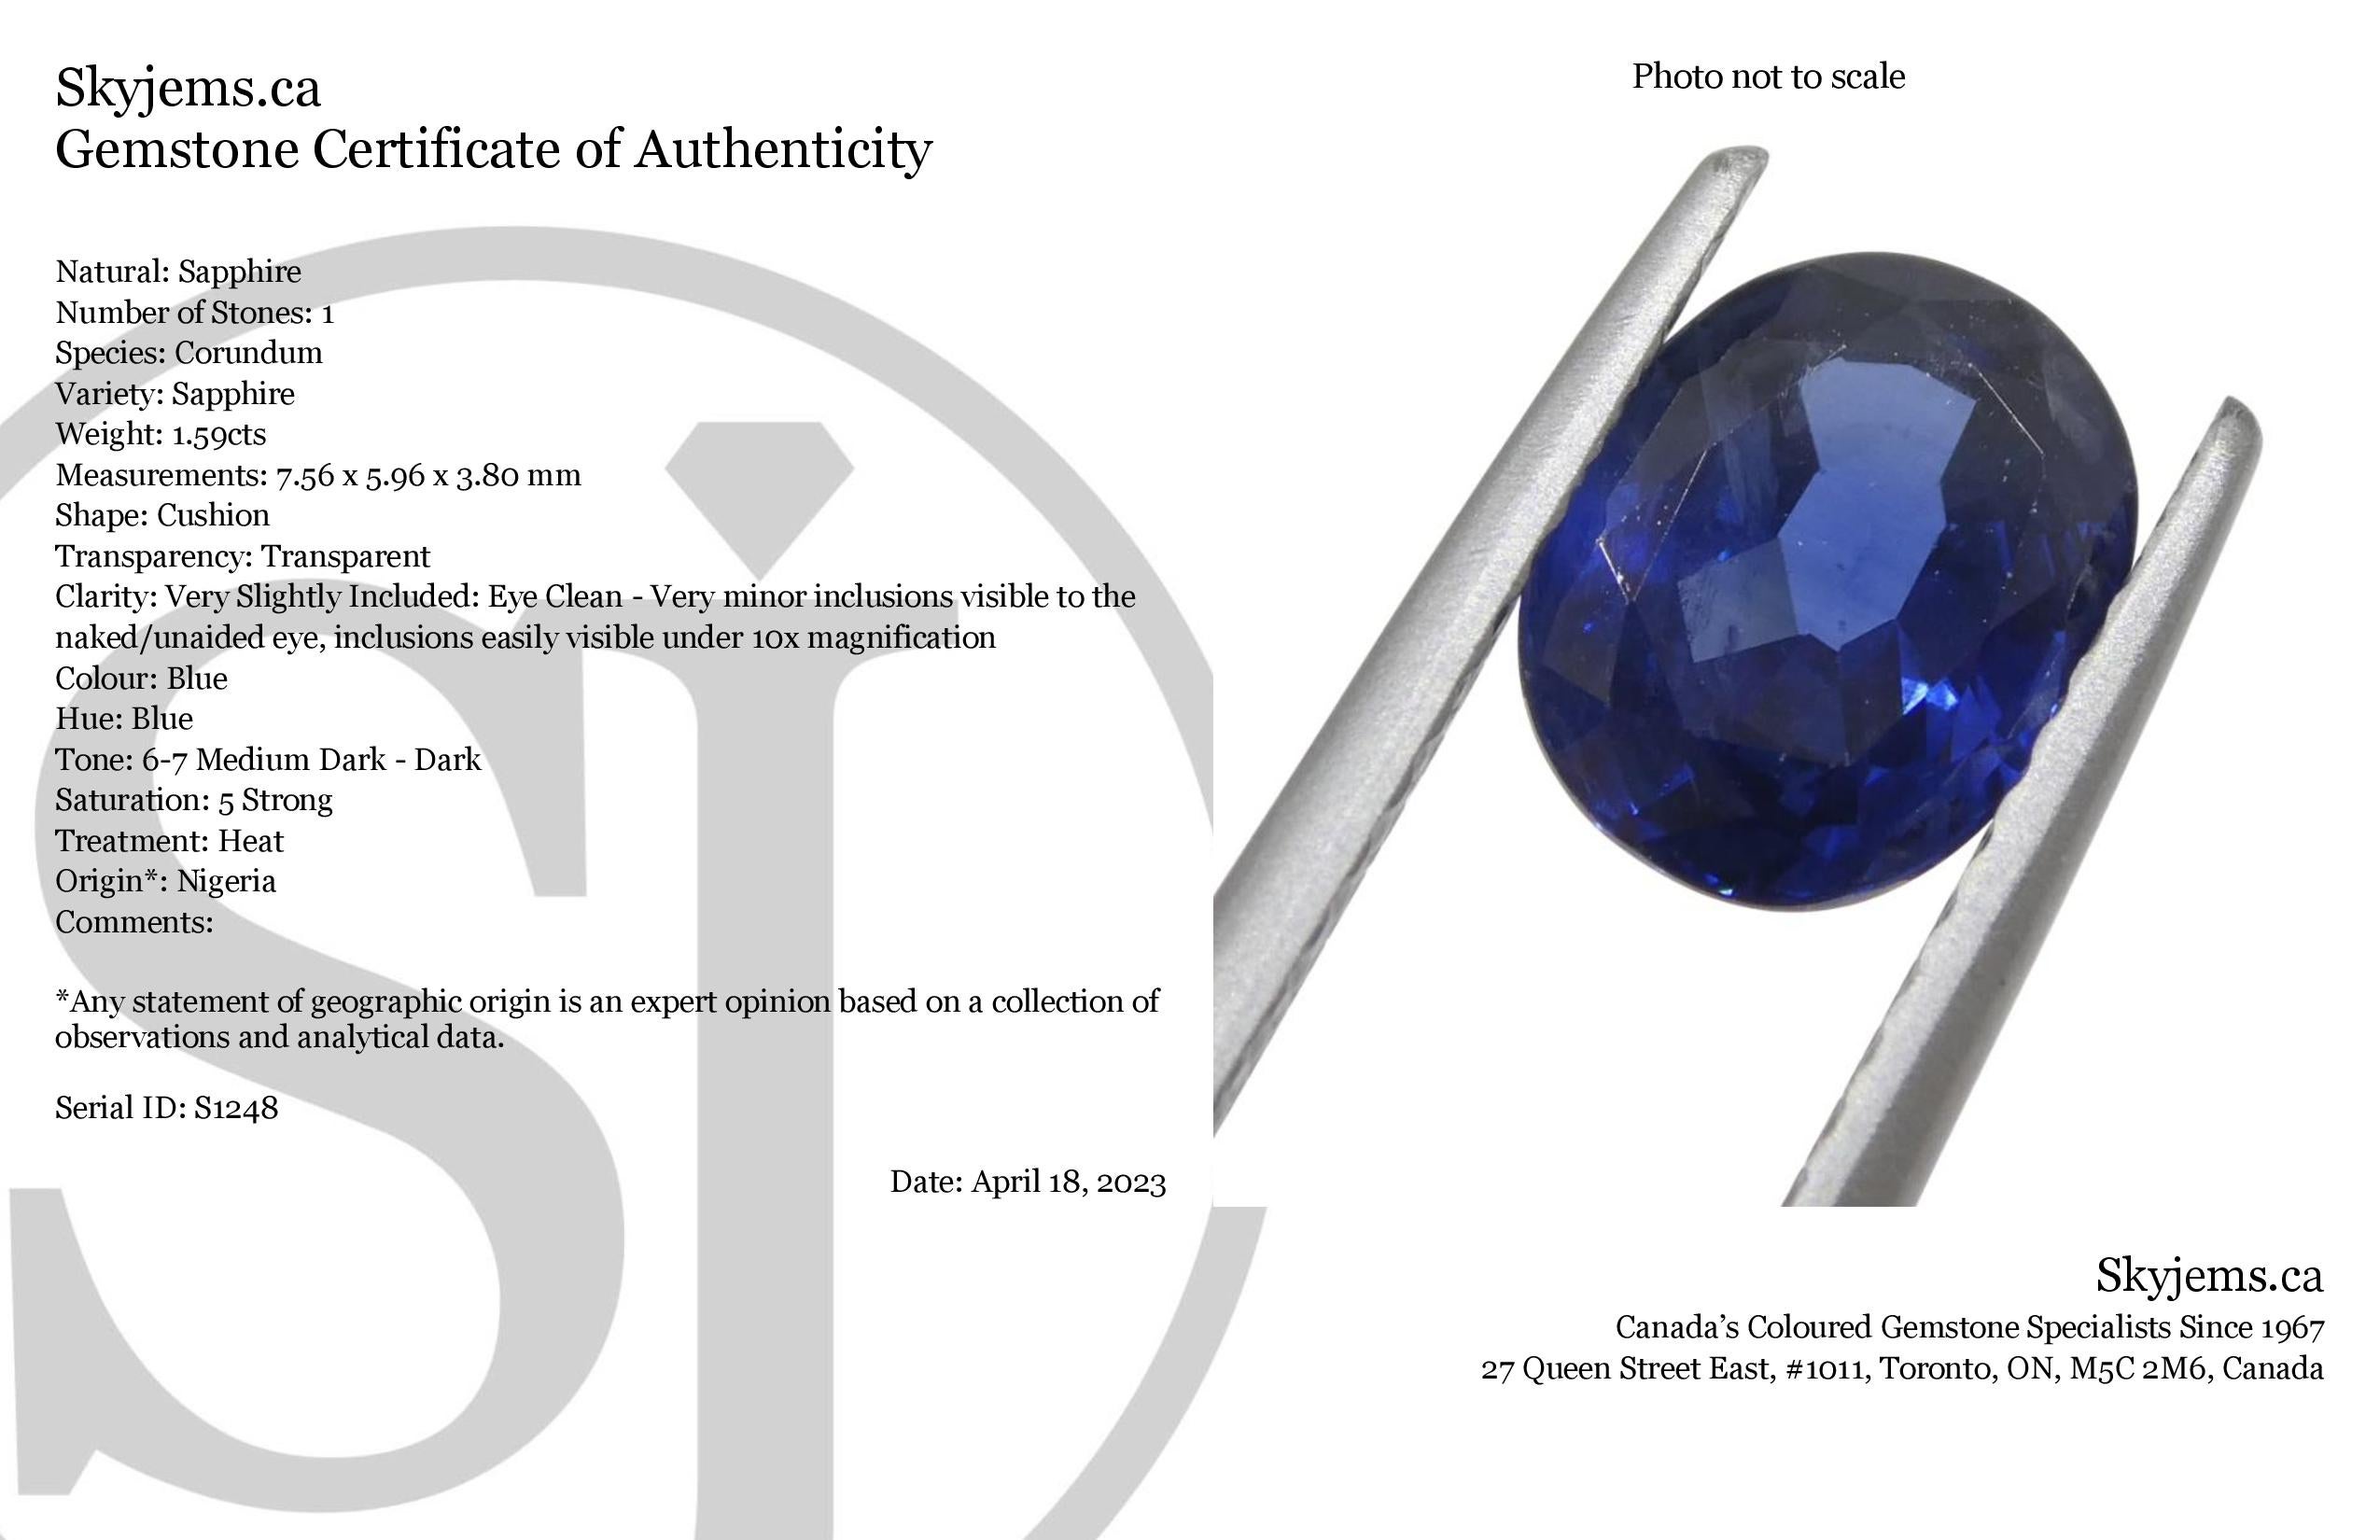 Description:

Gem Type: Sapphire
Number of Stones: 1
Weight: 1.59 cts
Measurements: 7.56 x 5.96 x 3.80 mm
Shape: Cushion
Cutting Style Crown: Modified Brilliant Cut
Cutting Style Pavilion: Step Cut
Transparency: Transparent
Clarity: Very Slightly